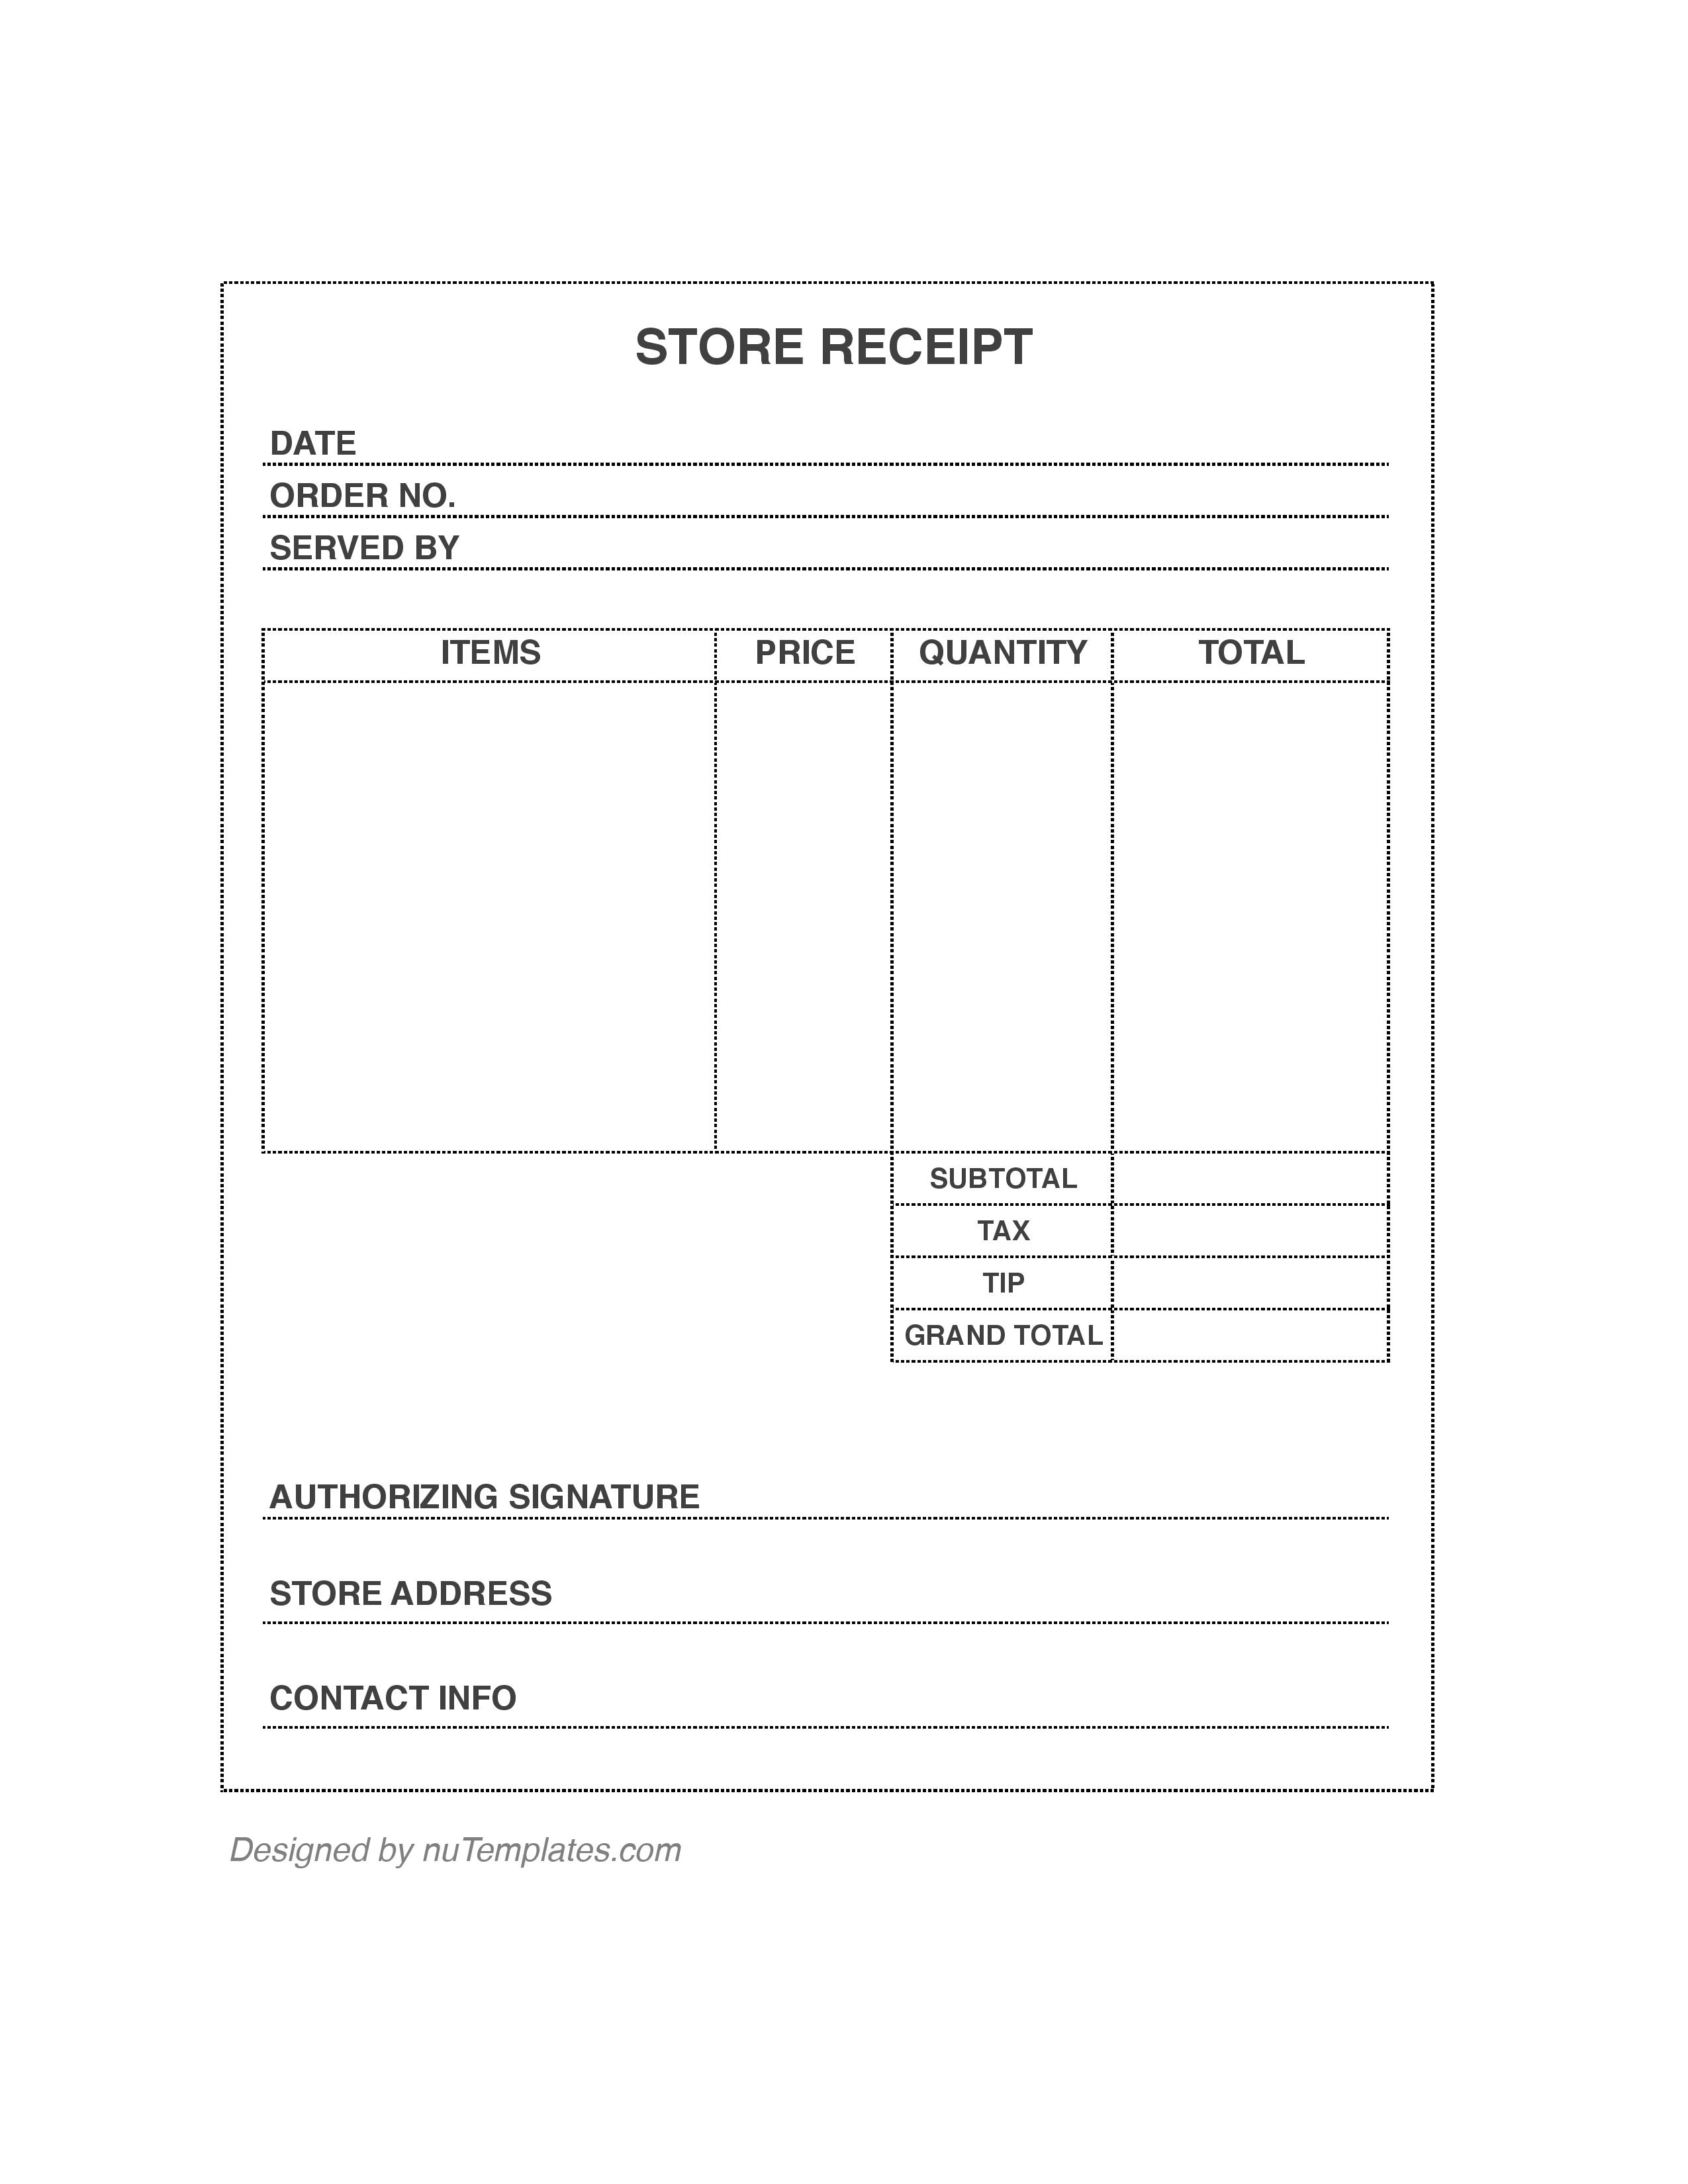 sample-receipt-form-philippines-the-document-template-5-sample-official-receipt-bryant-abel